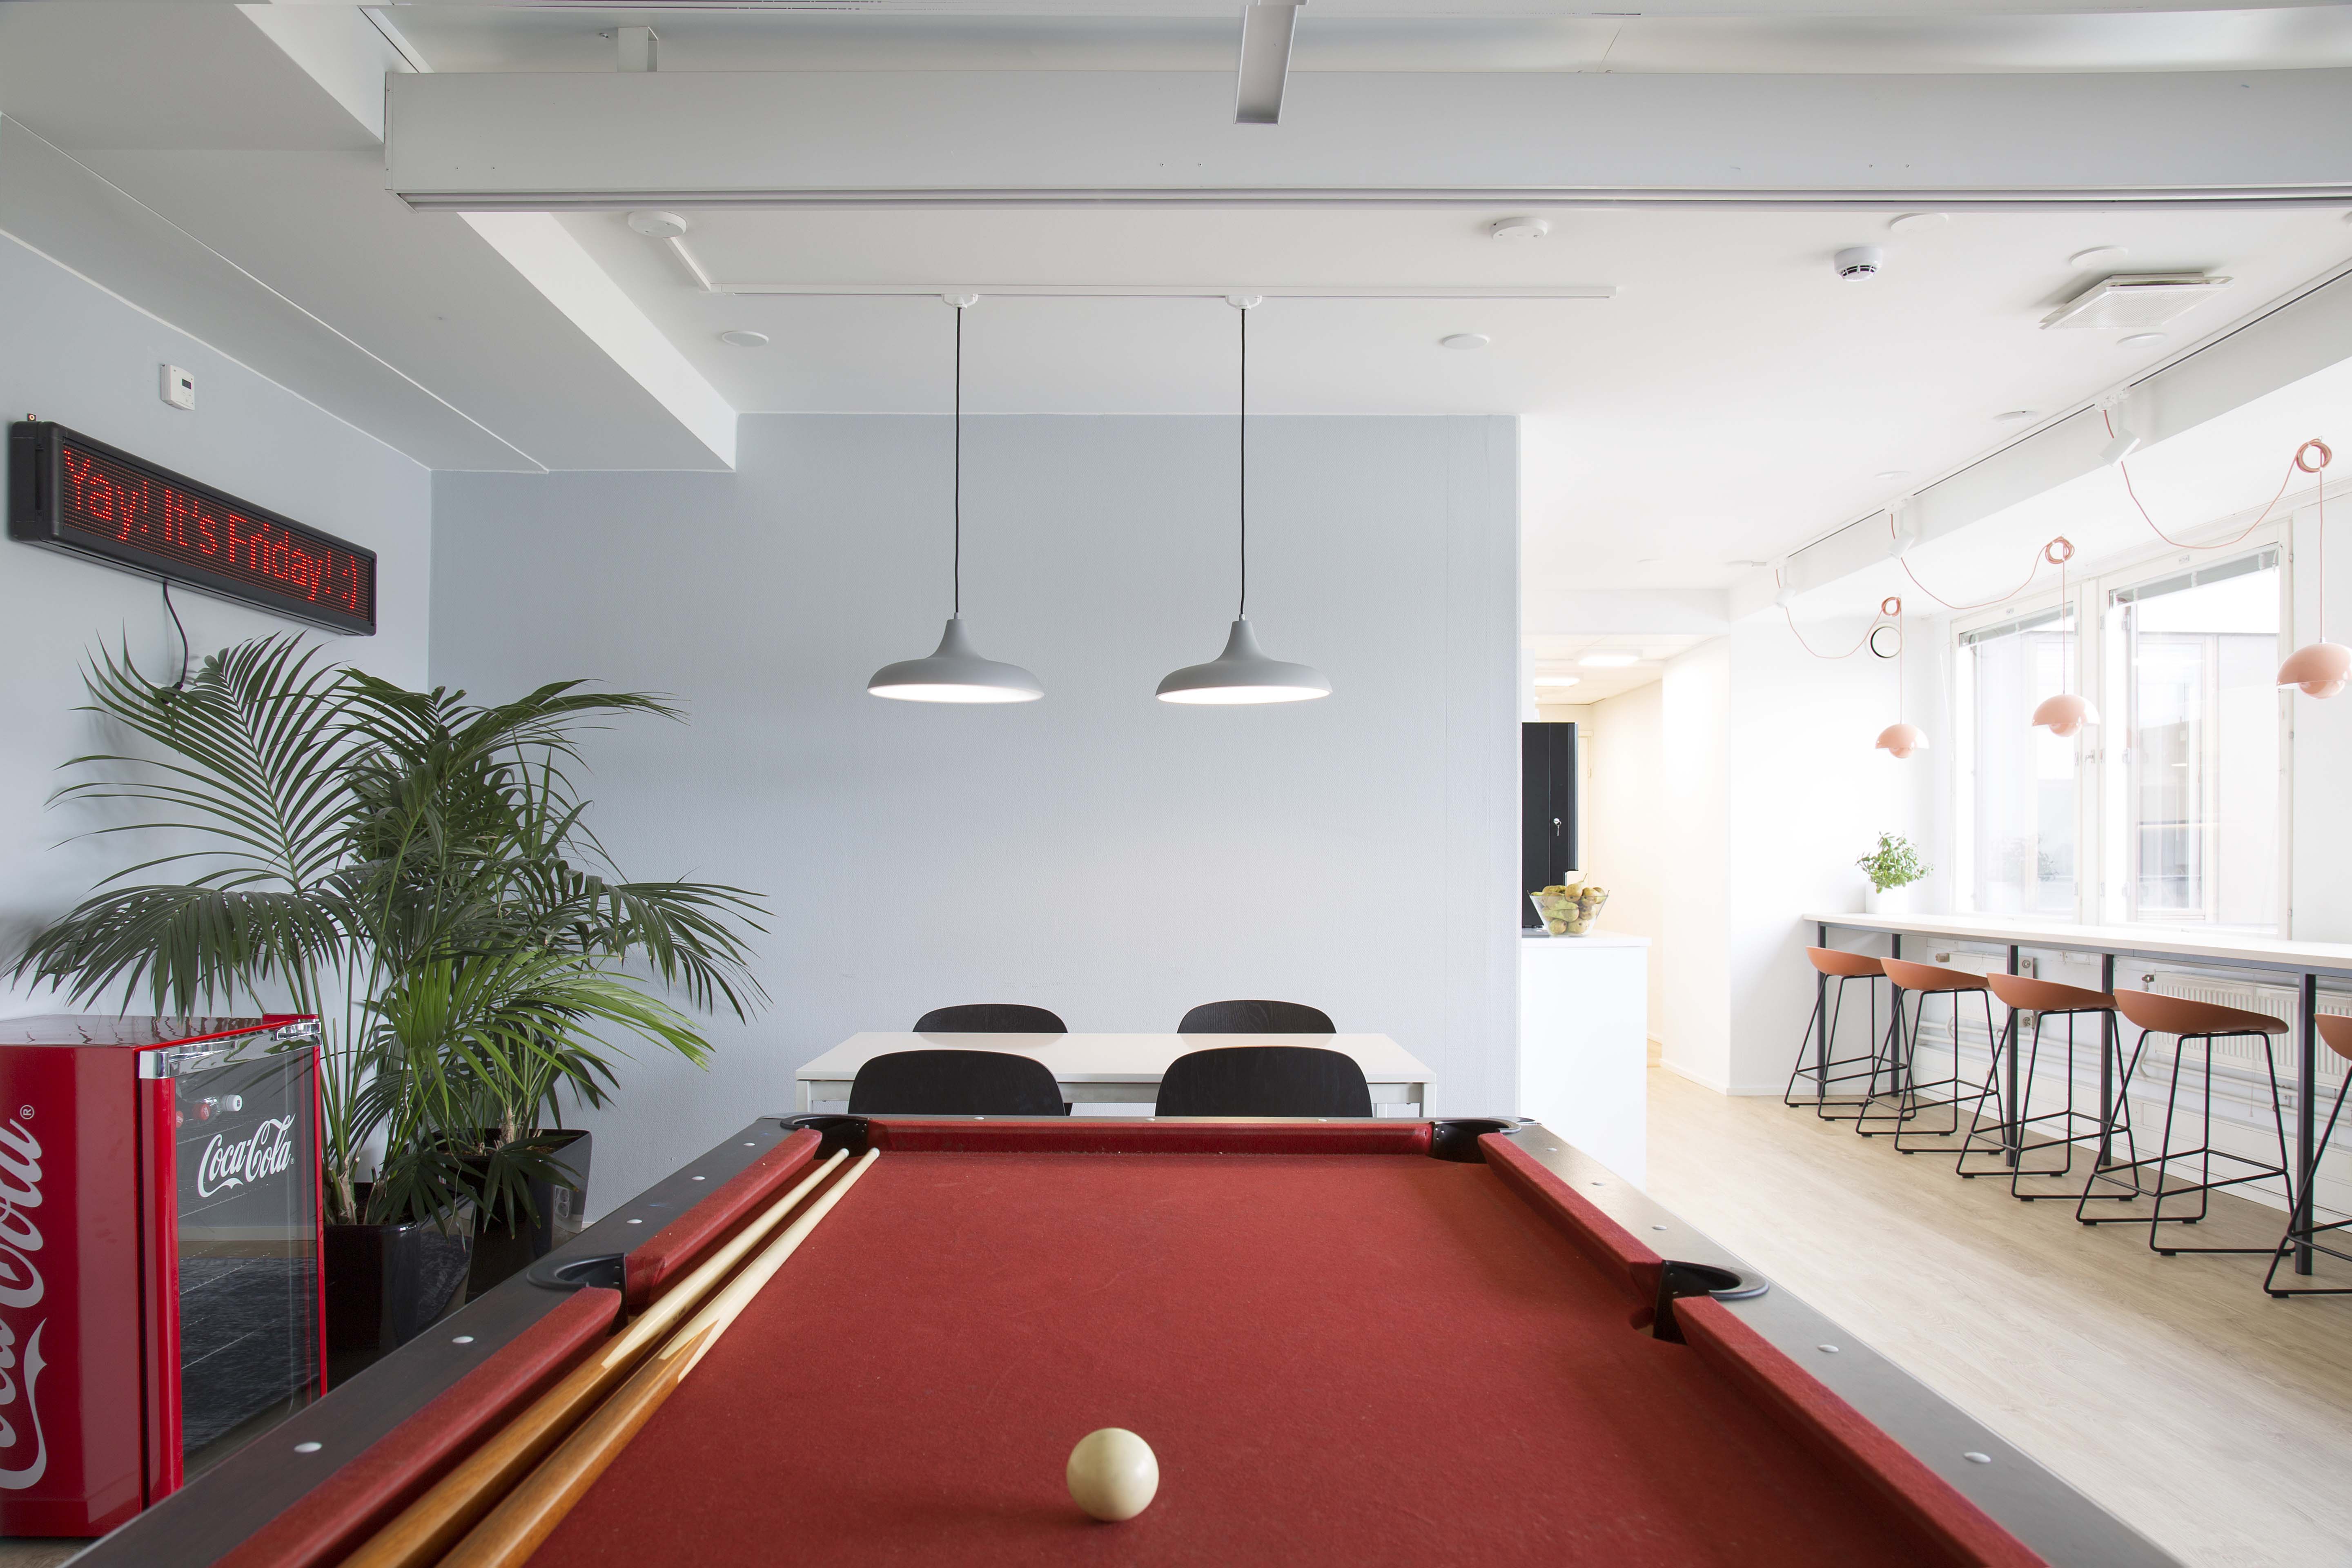 Smarp office kitchen lounge pool table